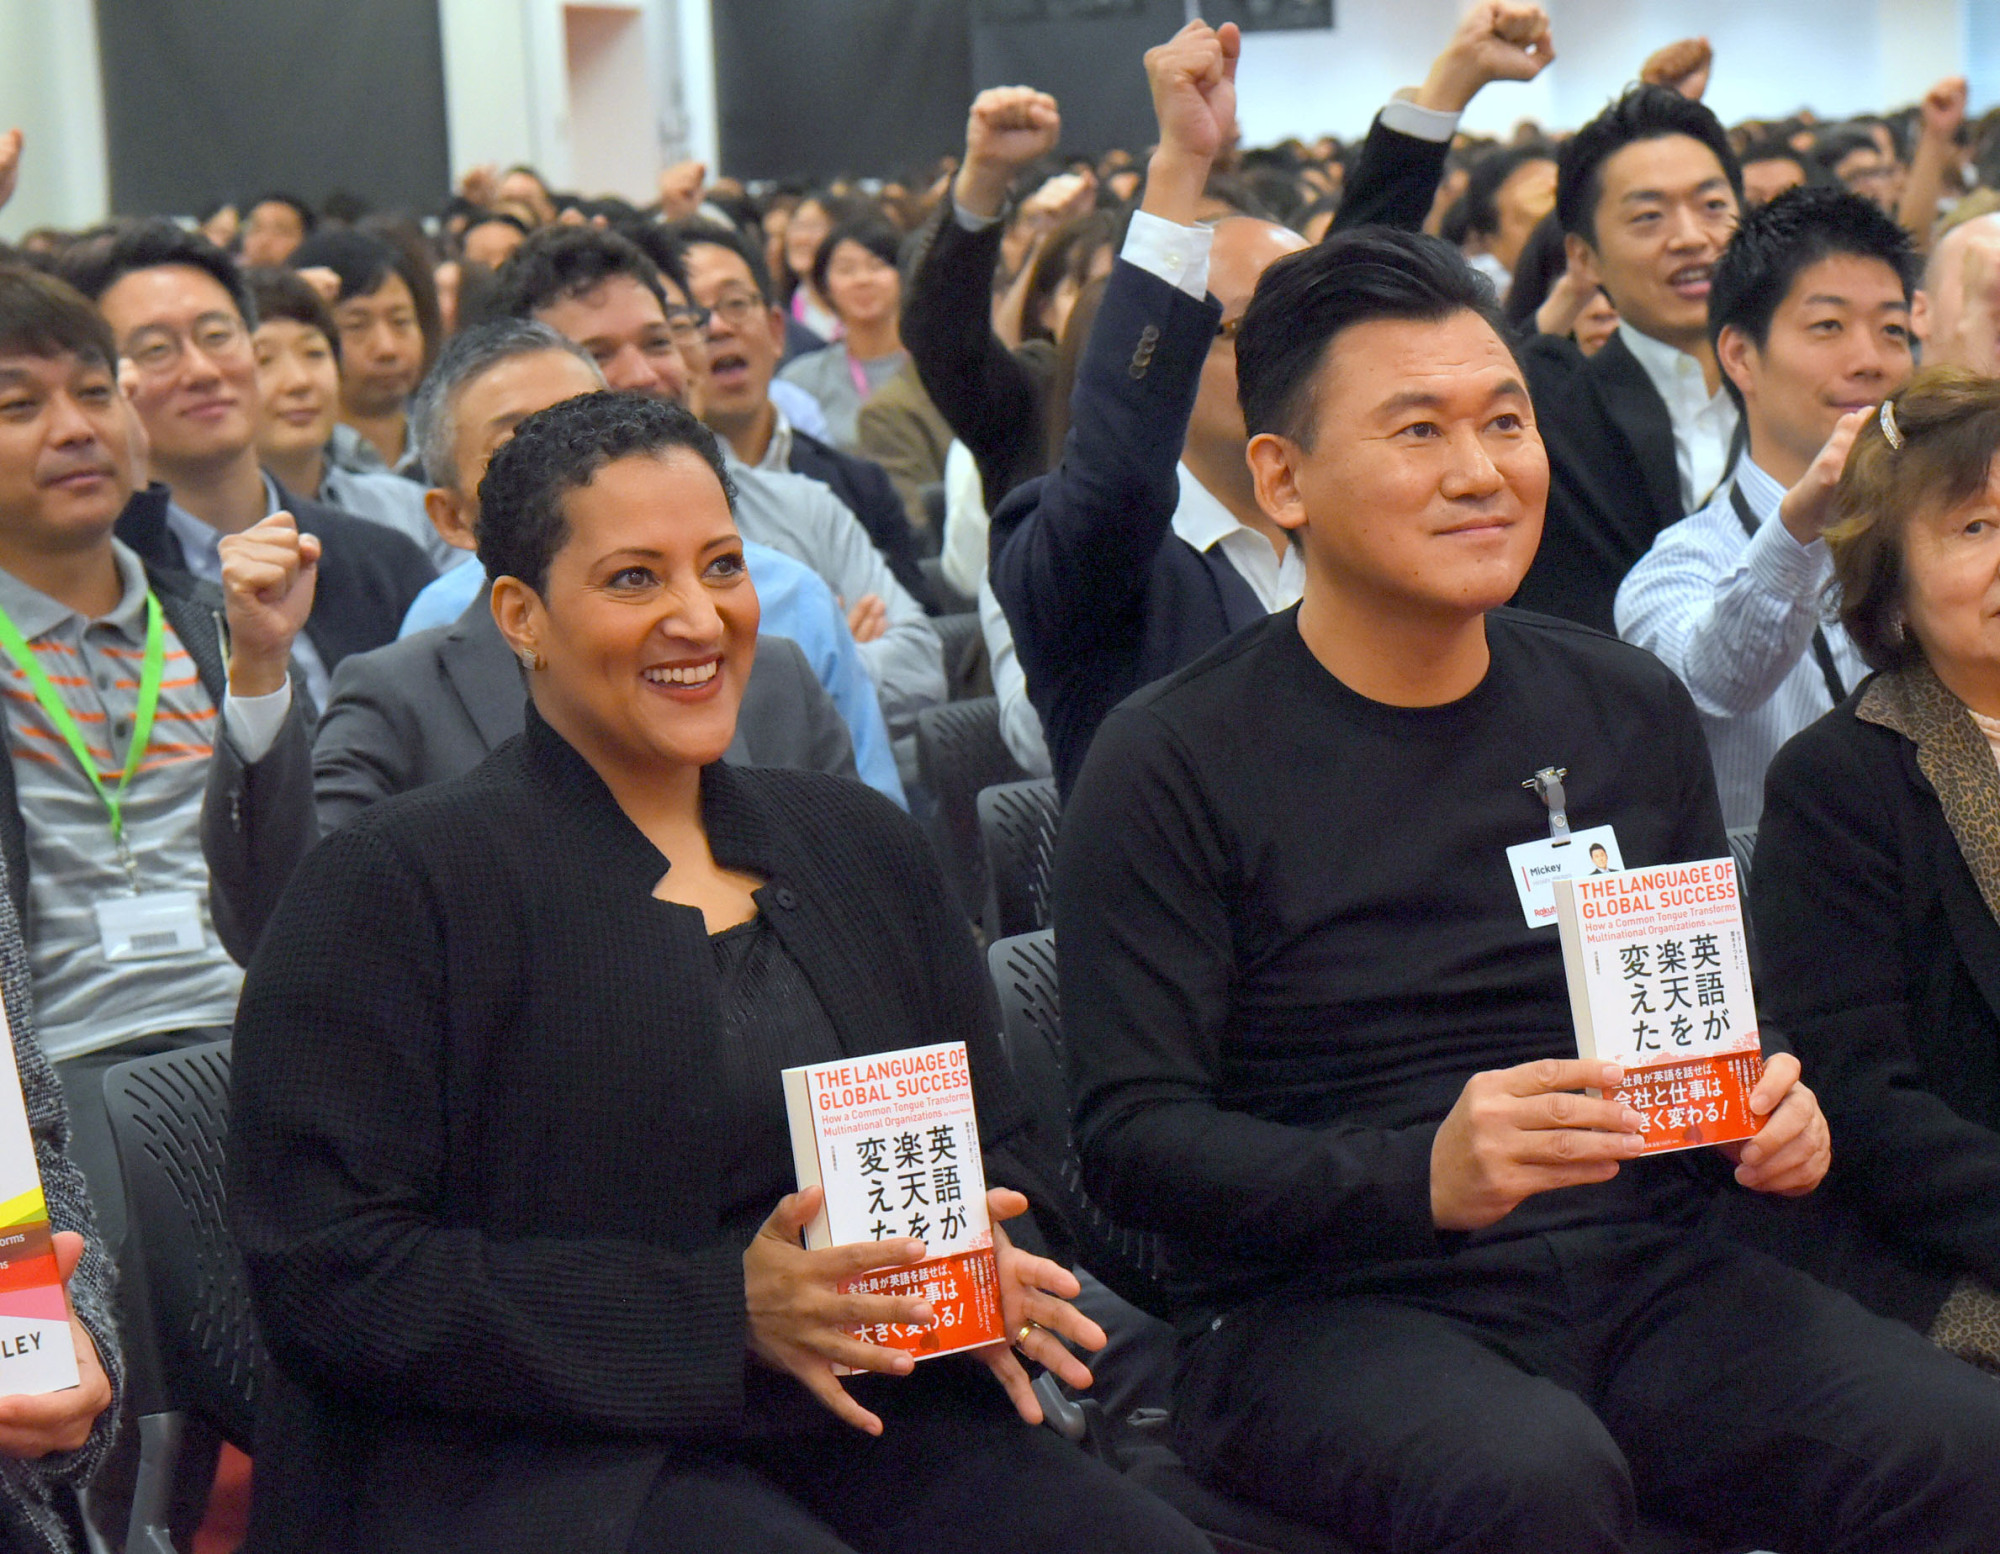 Speaking clearly: Tsedal Neeley, a professor at Harvard Business School, sits with Rakuten CEO Hiroshi Mikitani for a group picture after a lecture by Neeley on the e-commerce firm's English policy. | SATOKO KAWASAKI